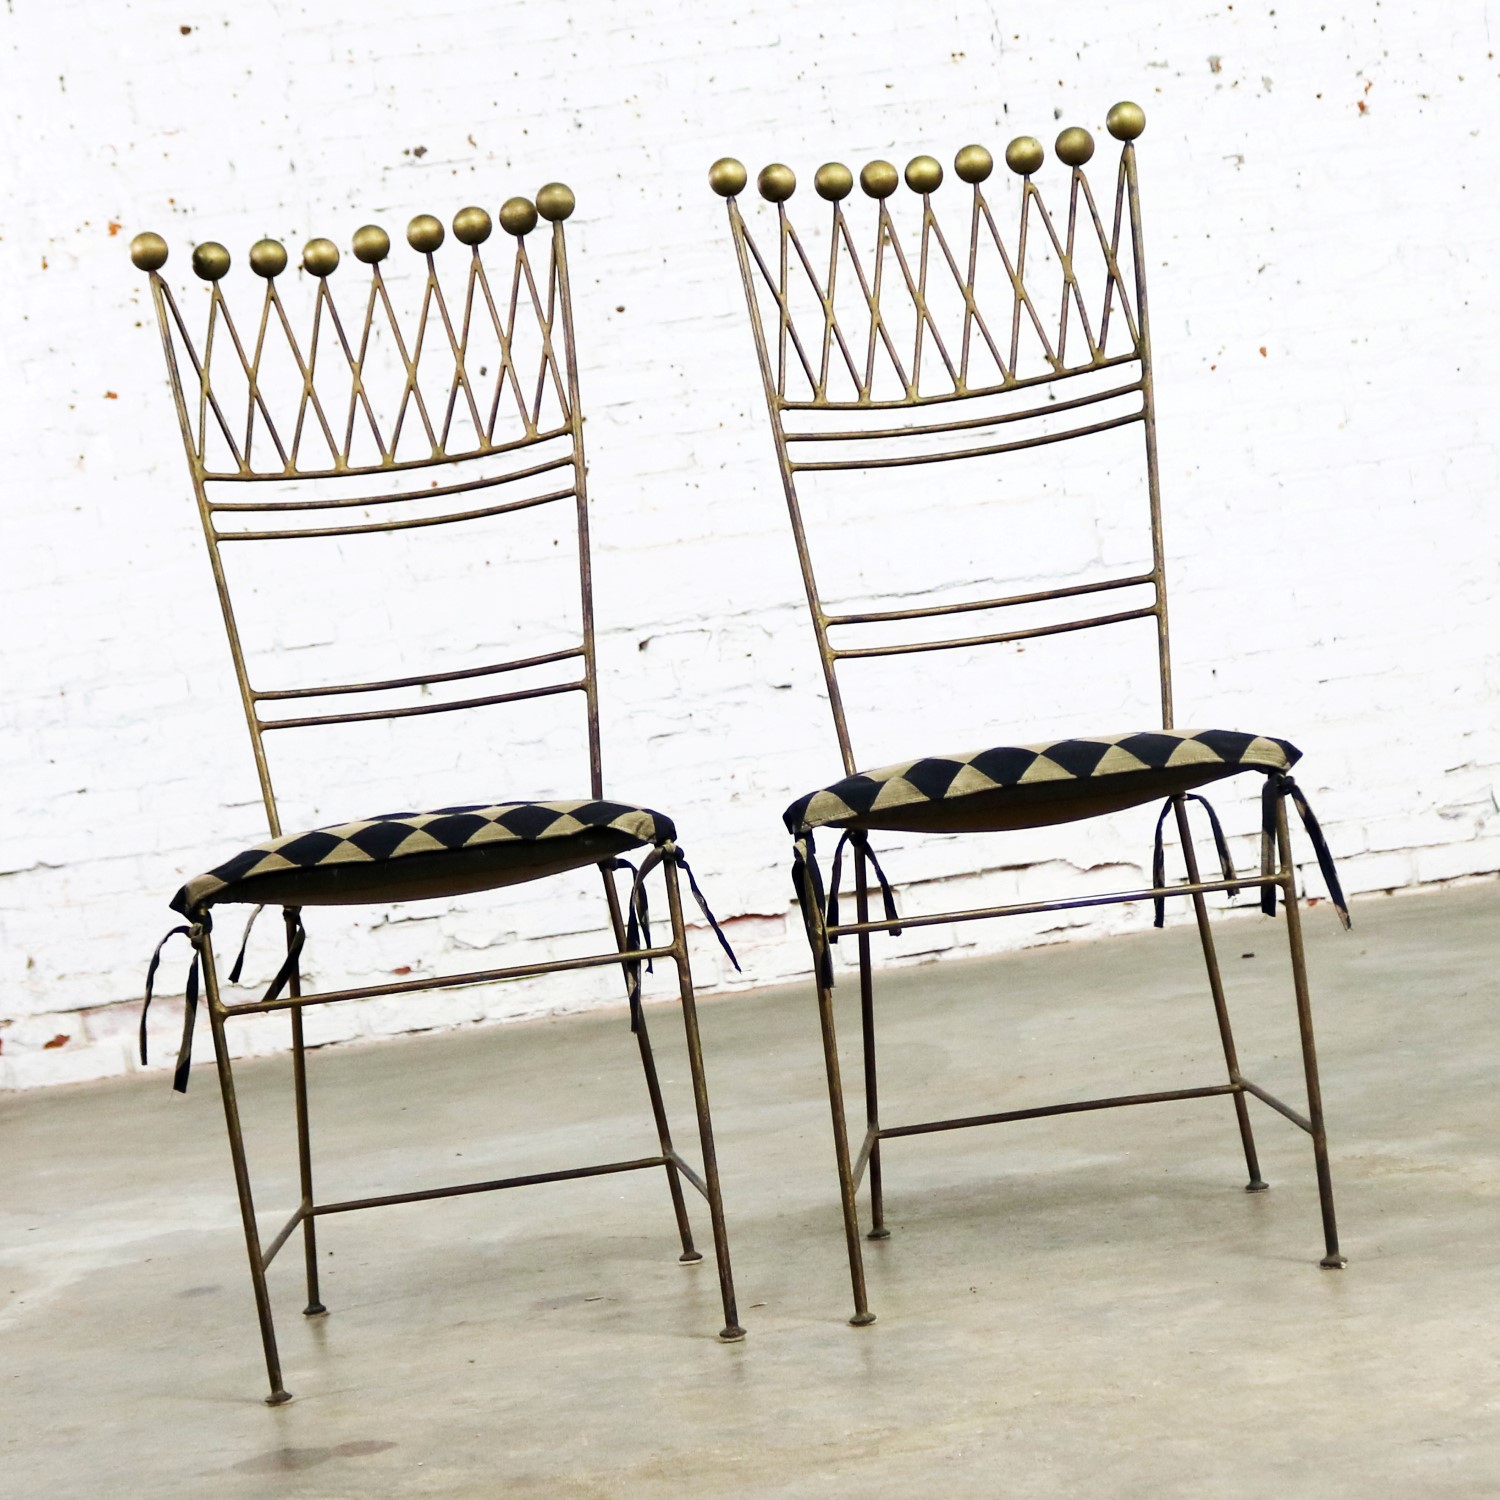 Pair Gilt Iron Chairs Crown or Harlequin Style Ball Finials Art Deco Hollywood Regency